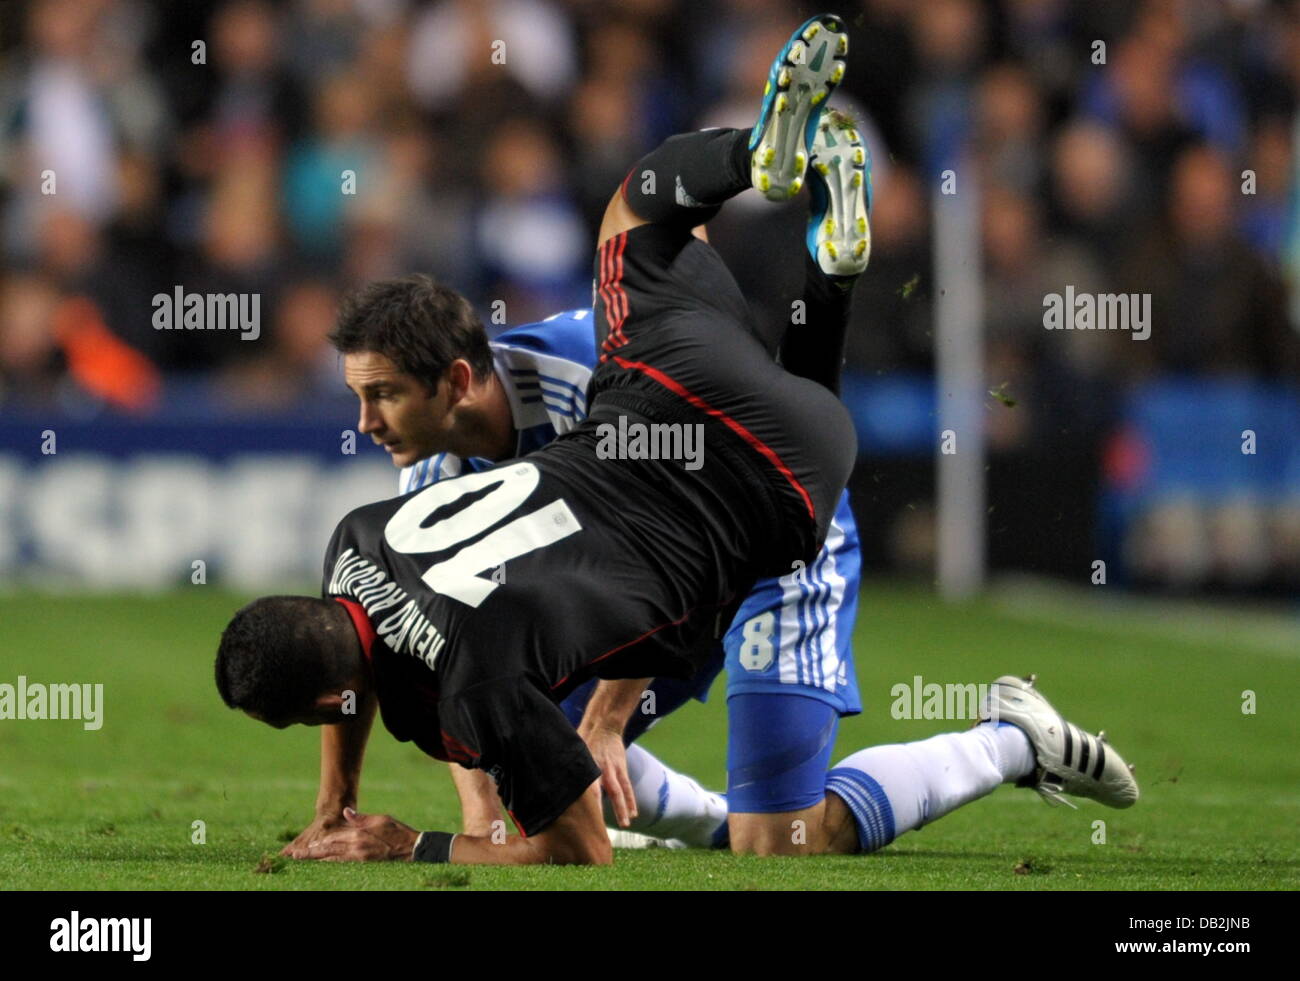 Chelsea's Frank Lampard (back) and Renato Augusto of Leverkusen vie for the ball during the Champions League group E soccer match between Chelsea FC and Bayer Leverkusen at Stamford Bridge stadium in London, Great Britain, 13 September 2011. Photo: Federico Gambarini dpa Stock Photo